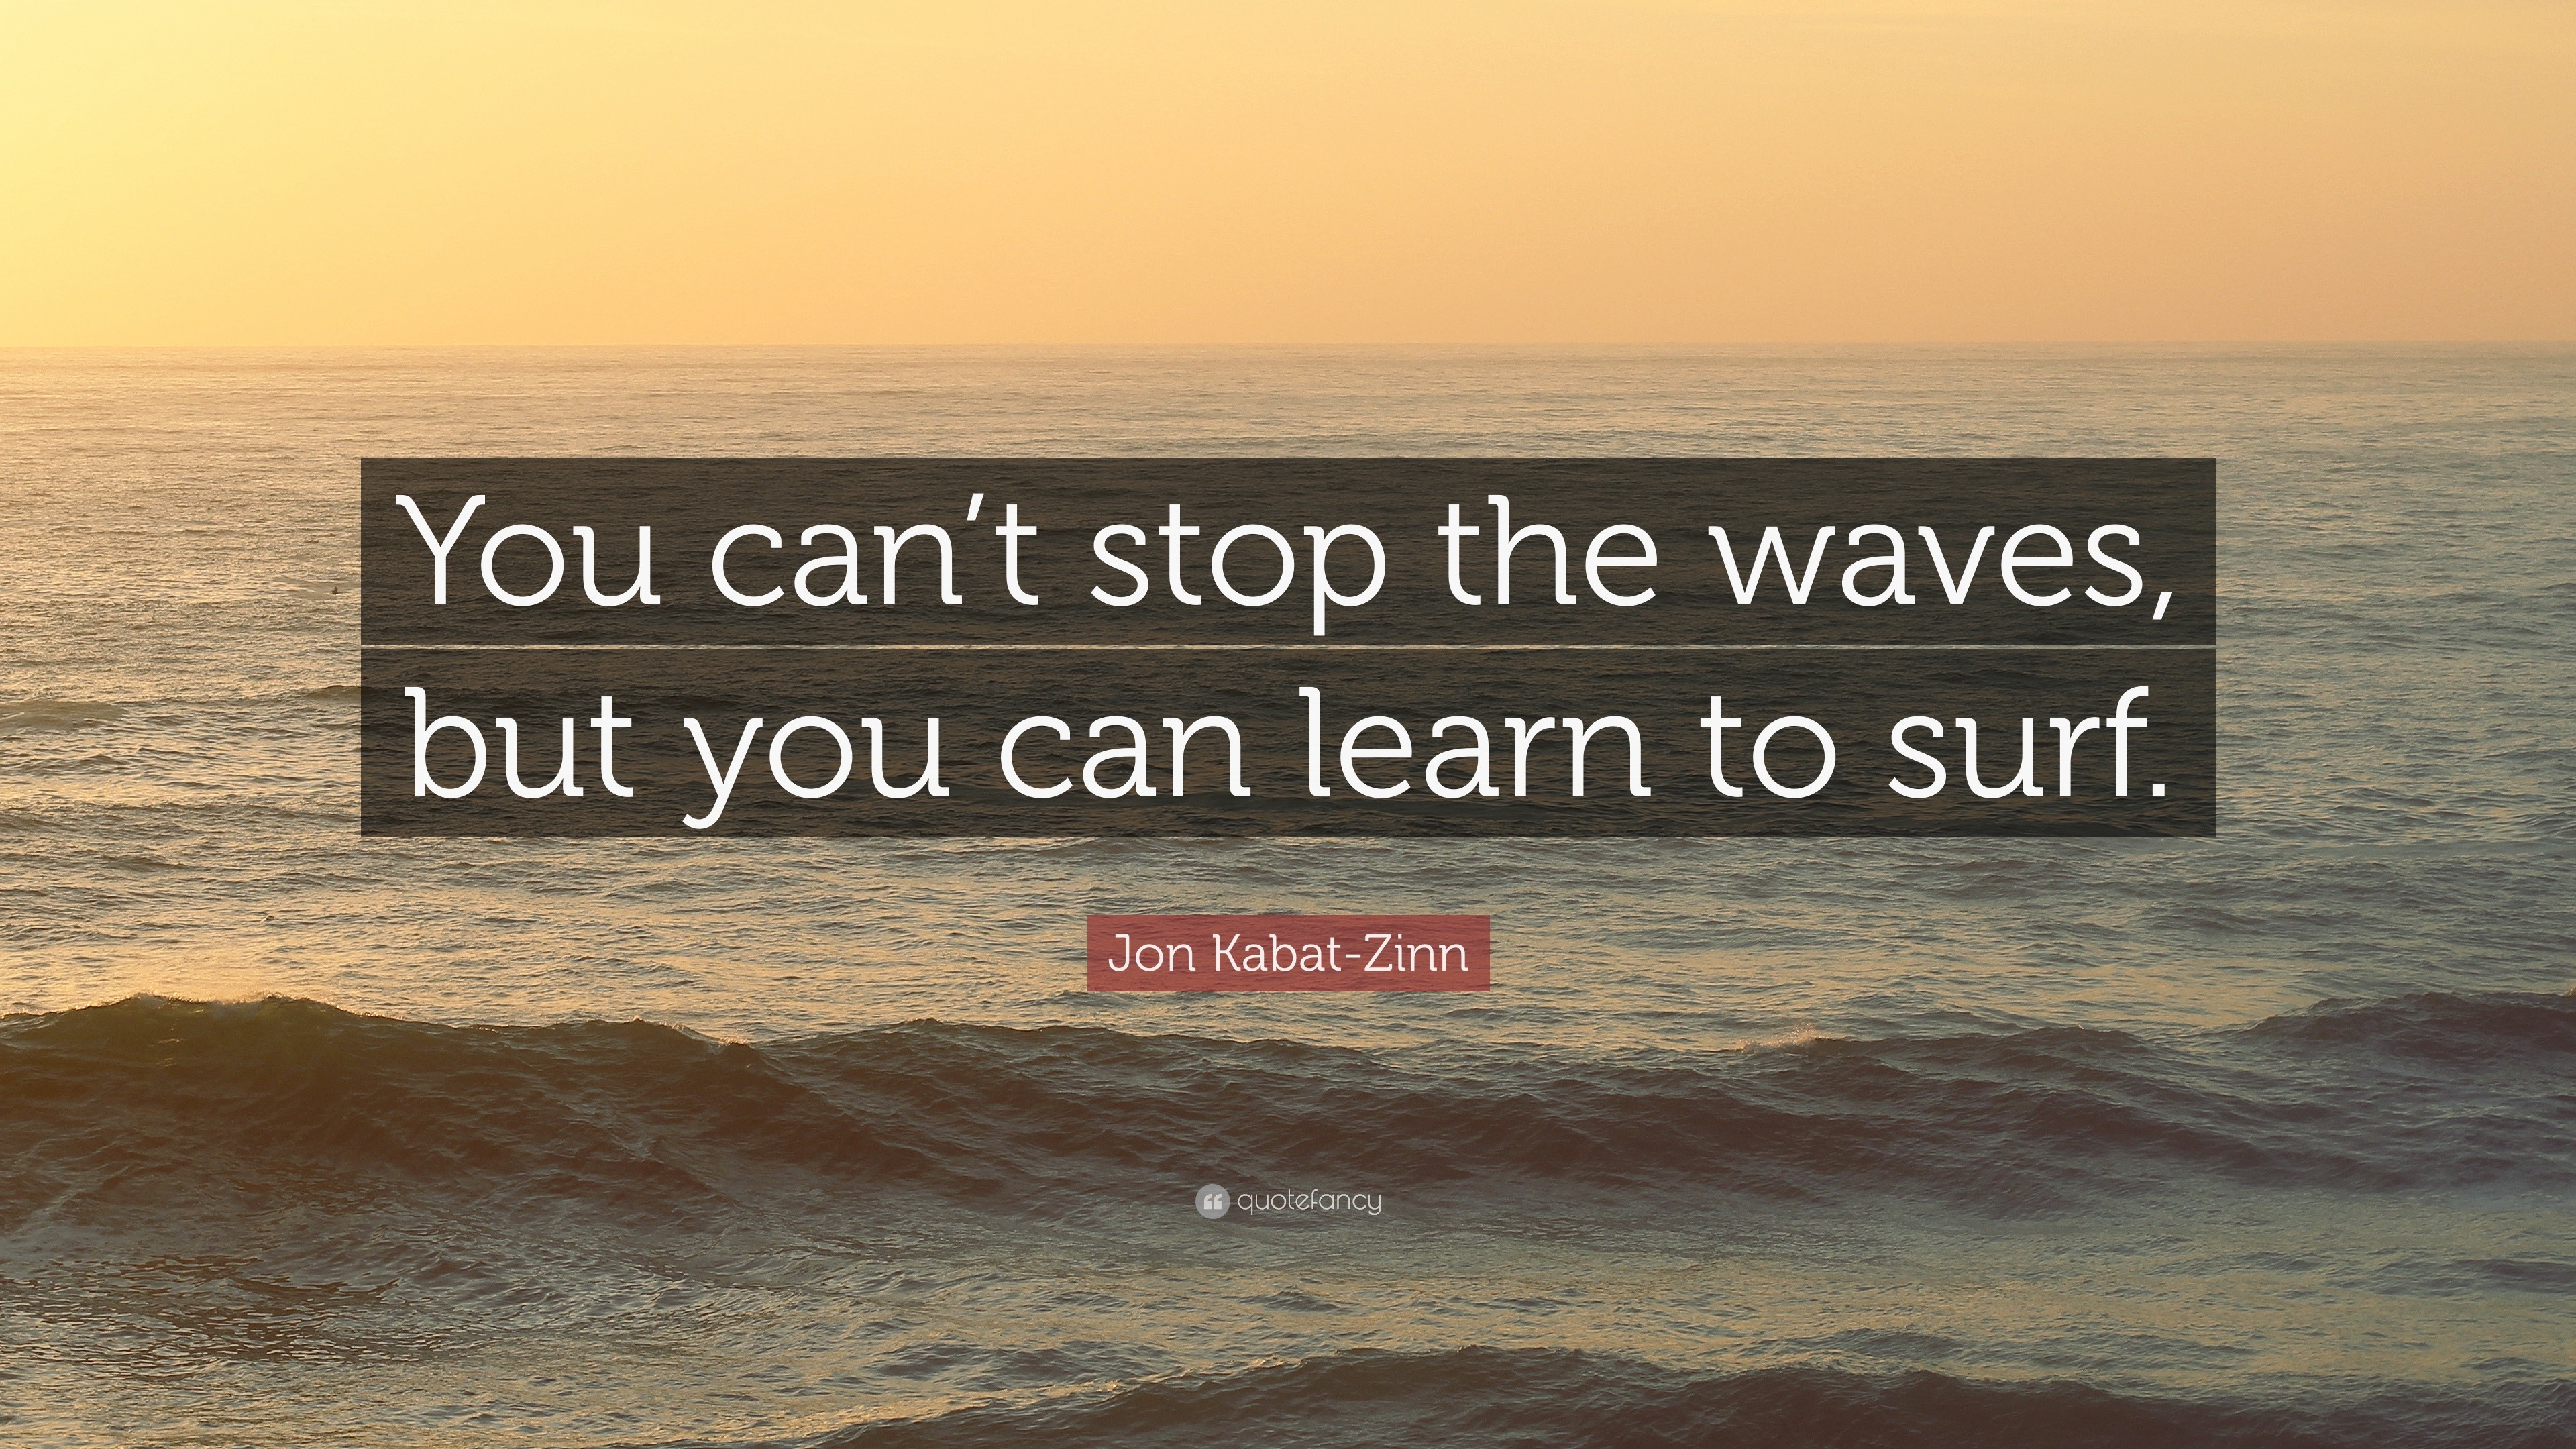 Jon Kabat Zinn Quote You Can T Stop The Waves But You Can Learn To Surf